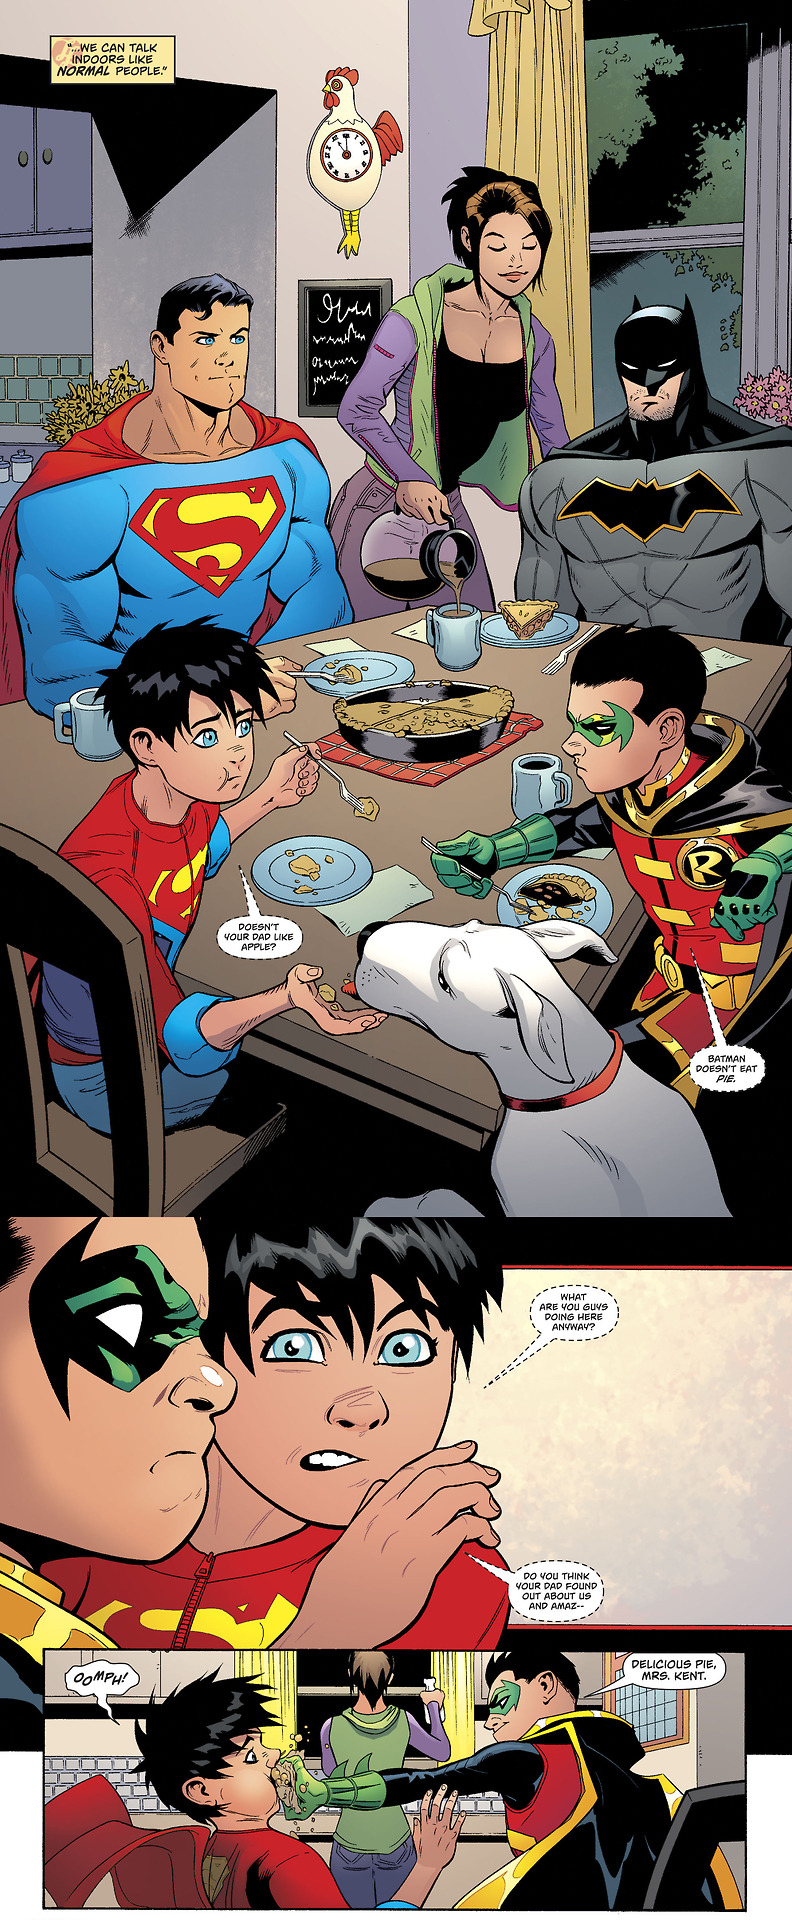 Batman &amp; Robin team up with the Kent Family in Patrick Gleason’s Superman